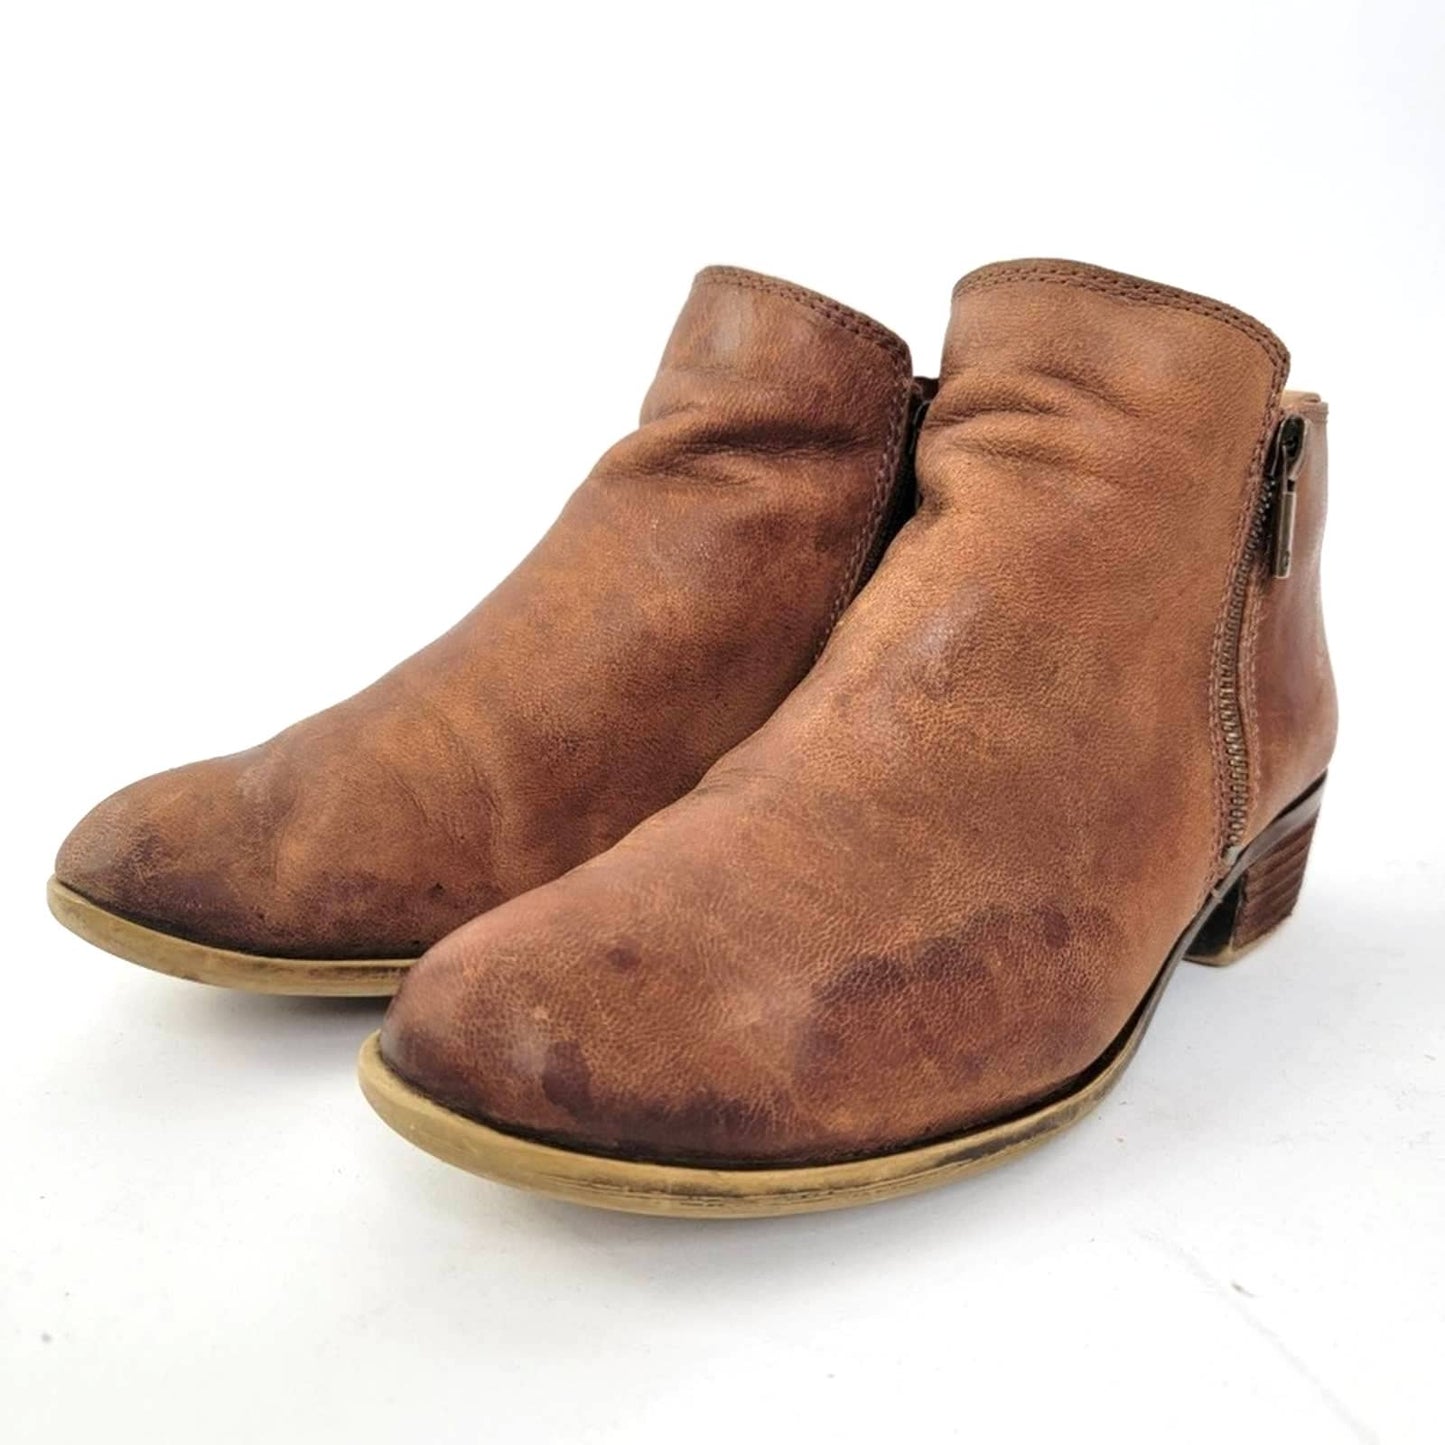 Lucky Brand Basel Bootie - Toffee - 8